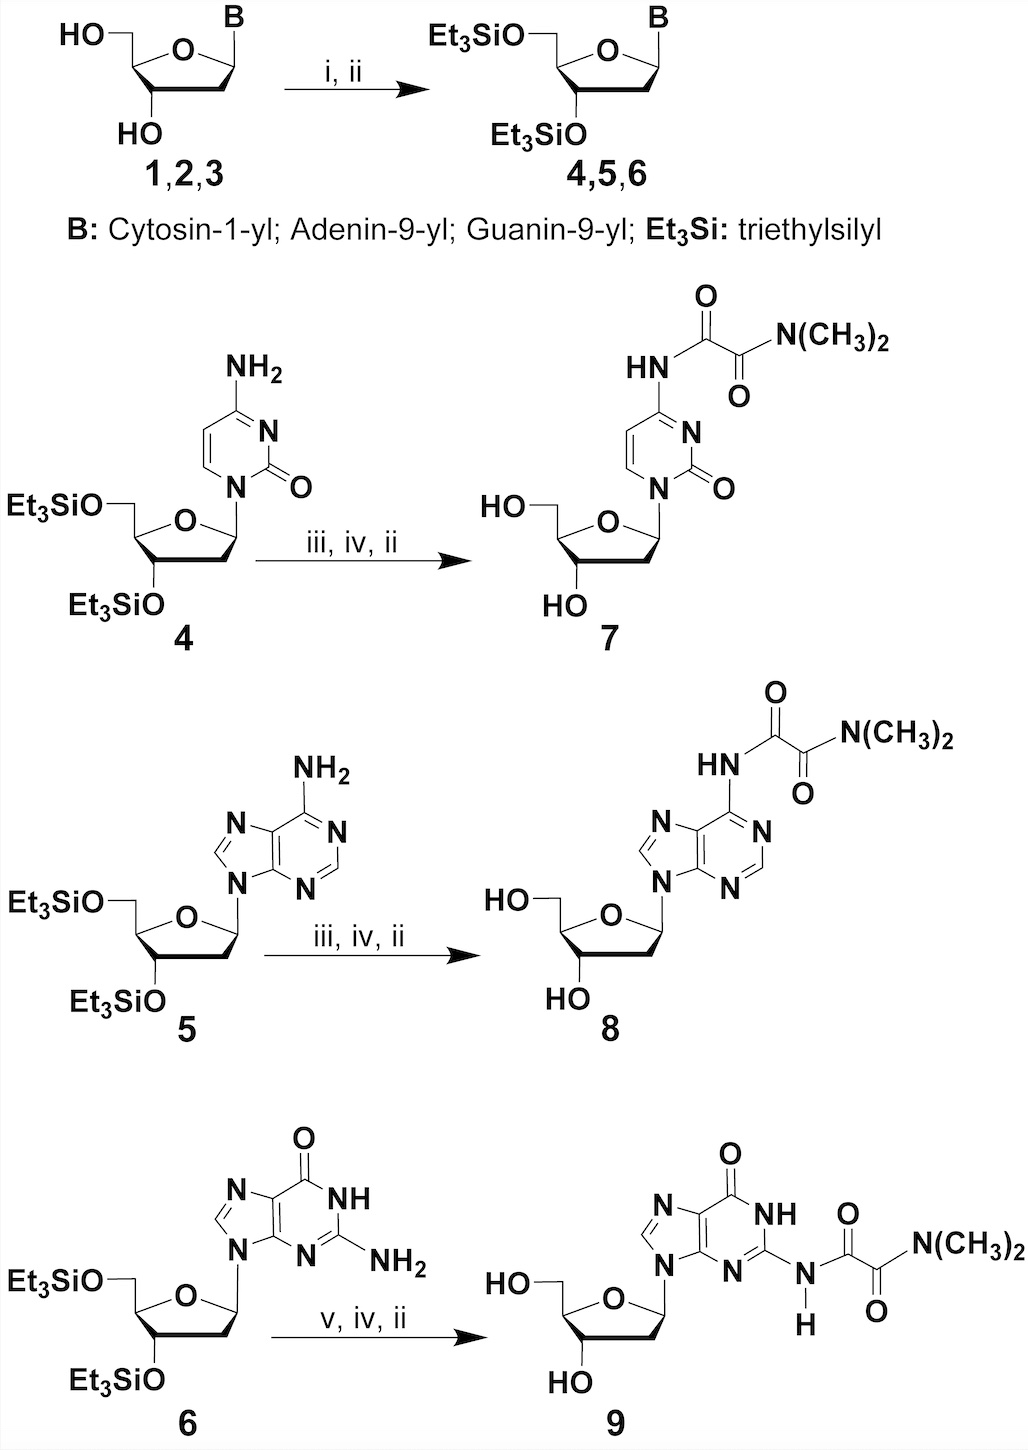 Scheme 1: protection of the exocyclic amine functions of deoxyribonucleosides 4, 5 and 6 as N, N-dimethyloxalamides affords 7, 8 and 9, respectively. Reagents and conditions: (i) chlorotriethylsilane, anh. pyridine, ~25 °C, 16 h; (ii) chromatography on silica gel; (iii) N, N-dimethyloxamic acid, HBTU, DMF, N, N-diisopropylethylamine, ~25 °C, 18 h; (iv), triethylamine trihydrofluoride, anh. CH2Cl2, ~25 °C, 30 min; (v) 2-(dimethylamino)-2-oxoacetic anhydride, anh. pyridine, ~25 °C, 18 h.